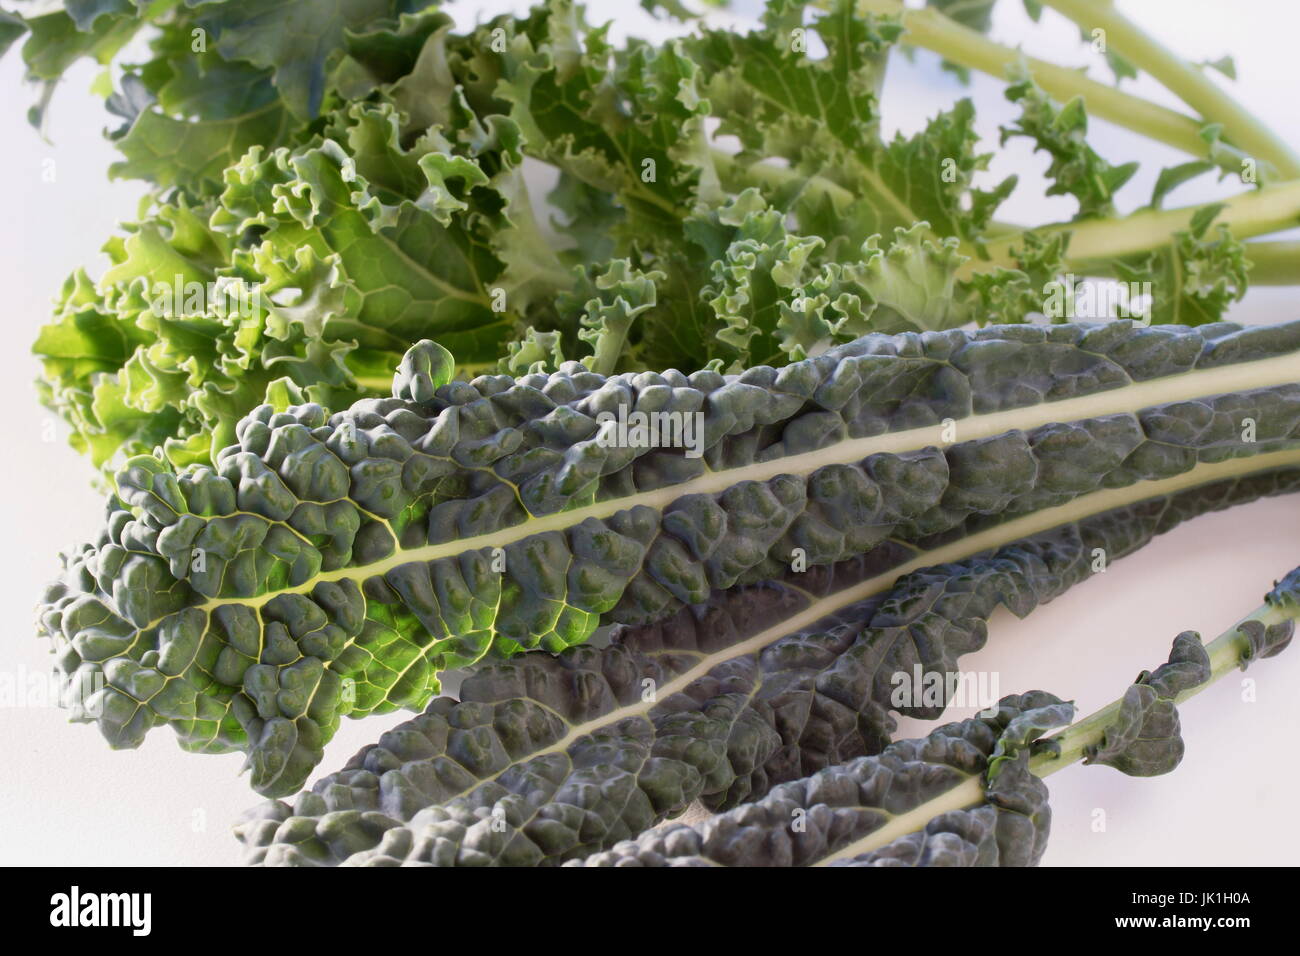 Popular kale varieties,  Tuscan kale end Blue Curled Vates Kale on a white background Stock Photo